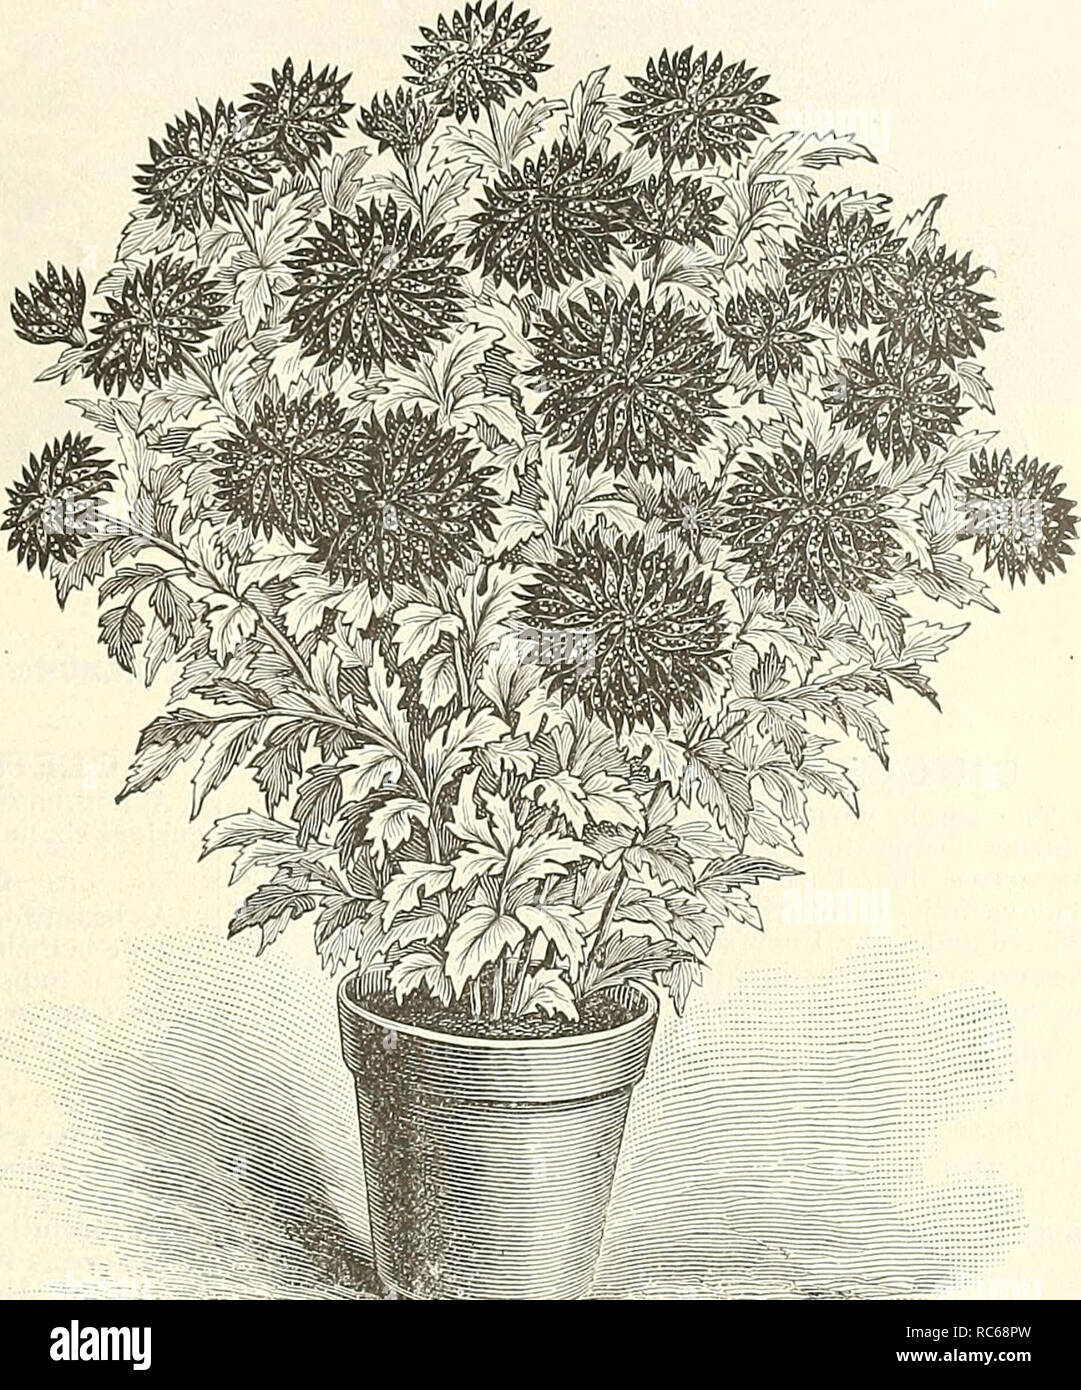 . Dreer's garden calendar : 1891. Seeds Catalogs; Nursery stock Catalogs; Gardening Catalogs; Flowers Seeds Catalogs; Fruit Seeds Catalogs. FOR GARDEN AND GREENHOUSE. 10-3 JAPANESE CHRYSANTHEMUMS. Continued. Mrs. Cleveland. Veiy fine pure white, petals tubular, very regularly arranged, forming almost a perfectly globular flower. Mrs. W, A. Harris. A most distinct variety, flowers very large, and of a delicate shade of creamy white and pink ; petals loosely arranged and wavy. Mrs. W. Meucke. Briglitest shade of yellow; petals slender, and of peculiar shape. Mrs. Jones. A magnificent late golden Stock Photo